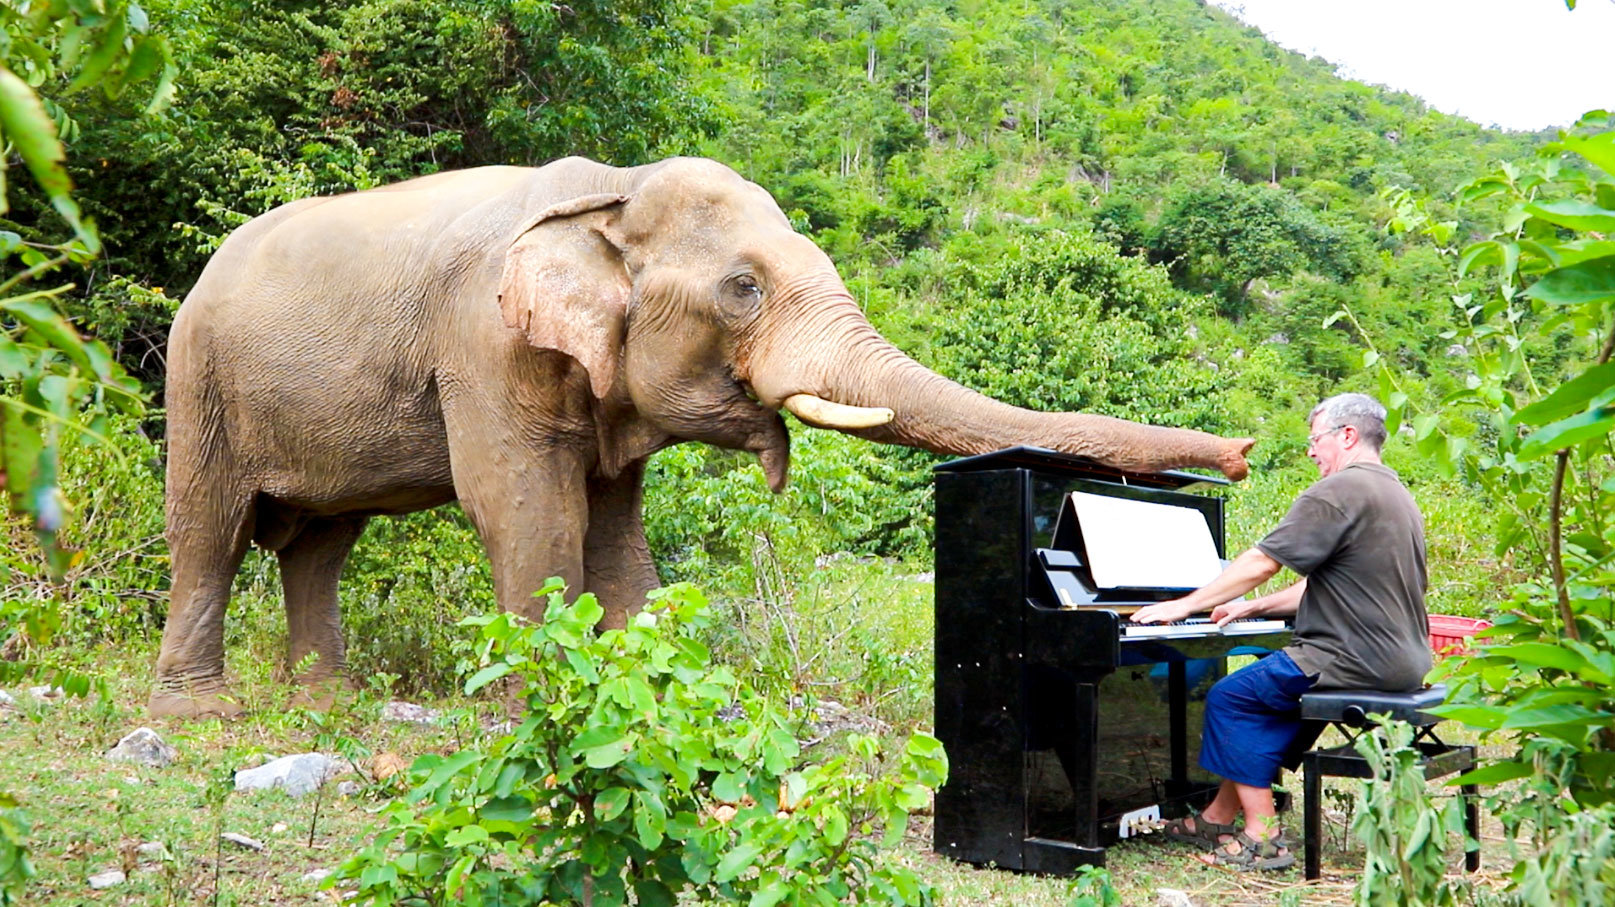 Pianist Paul Barton plays the piano while an elephant touches him with his trunk